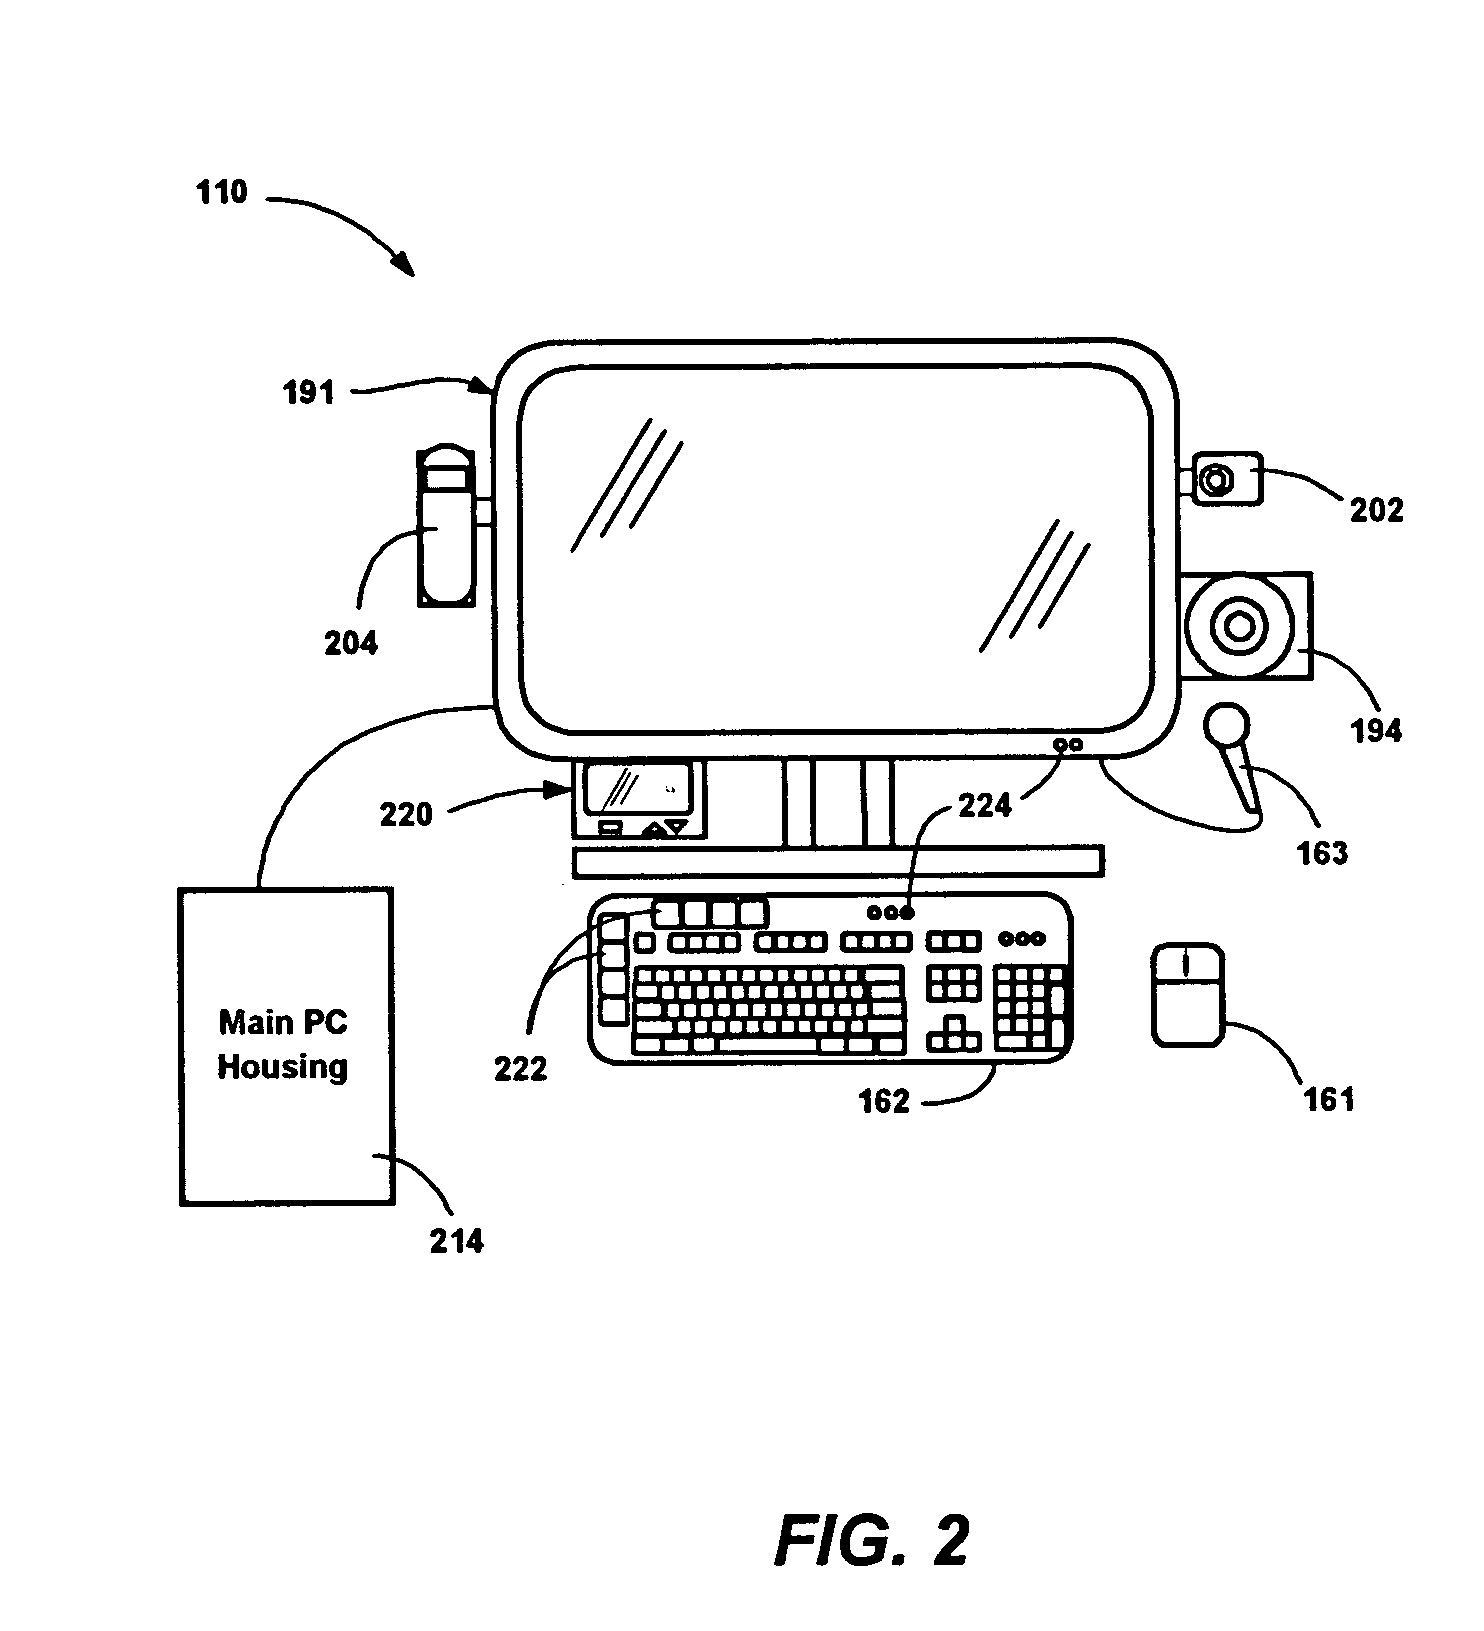 Method and system for capturing video on a personal computer